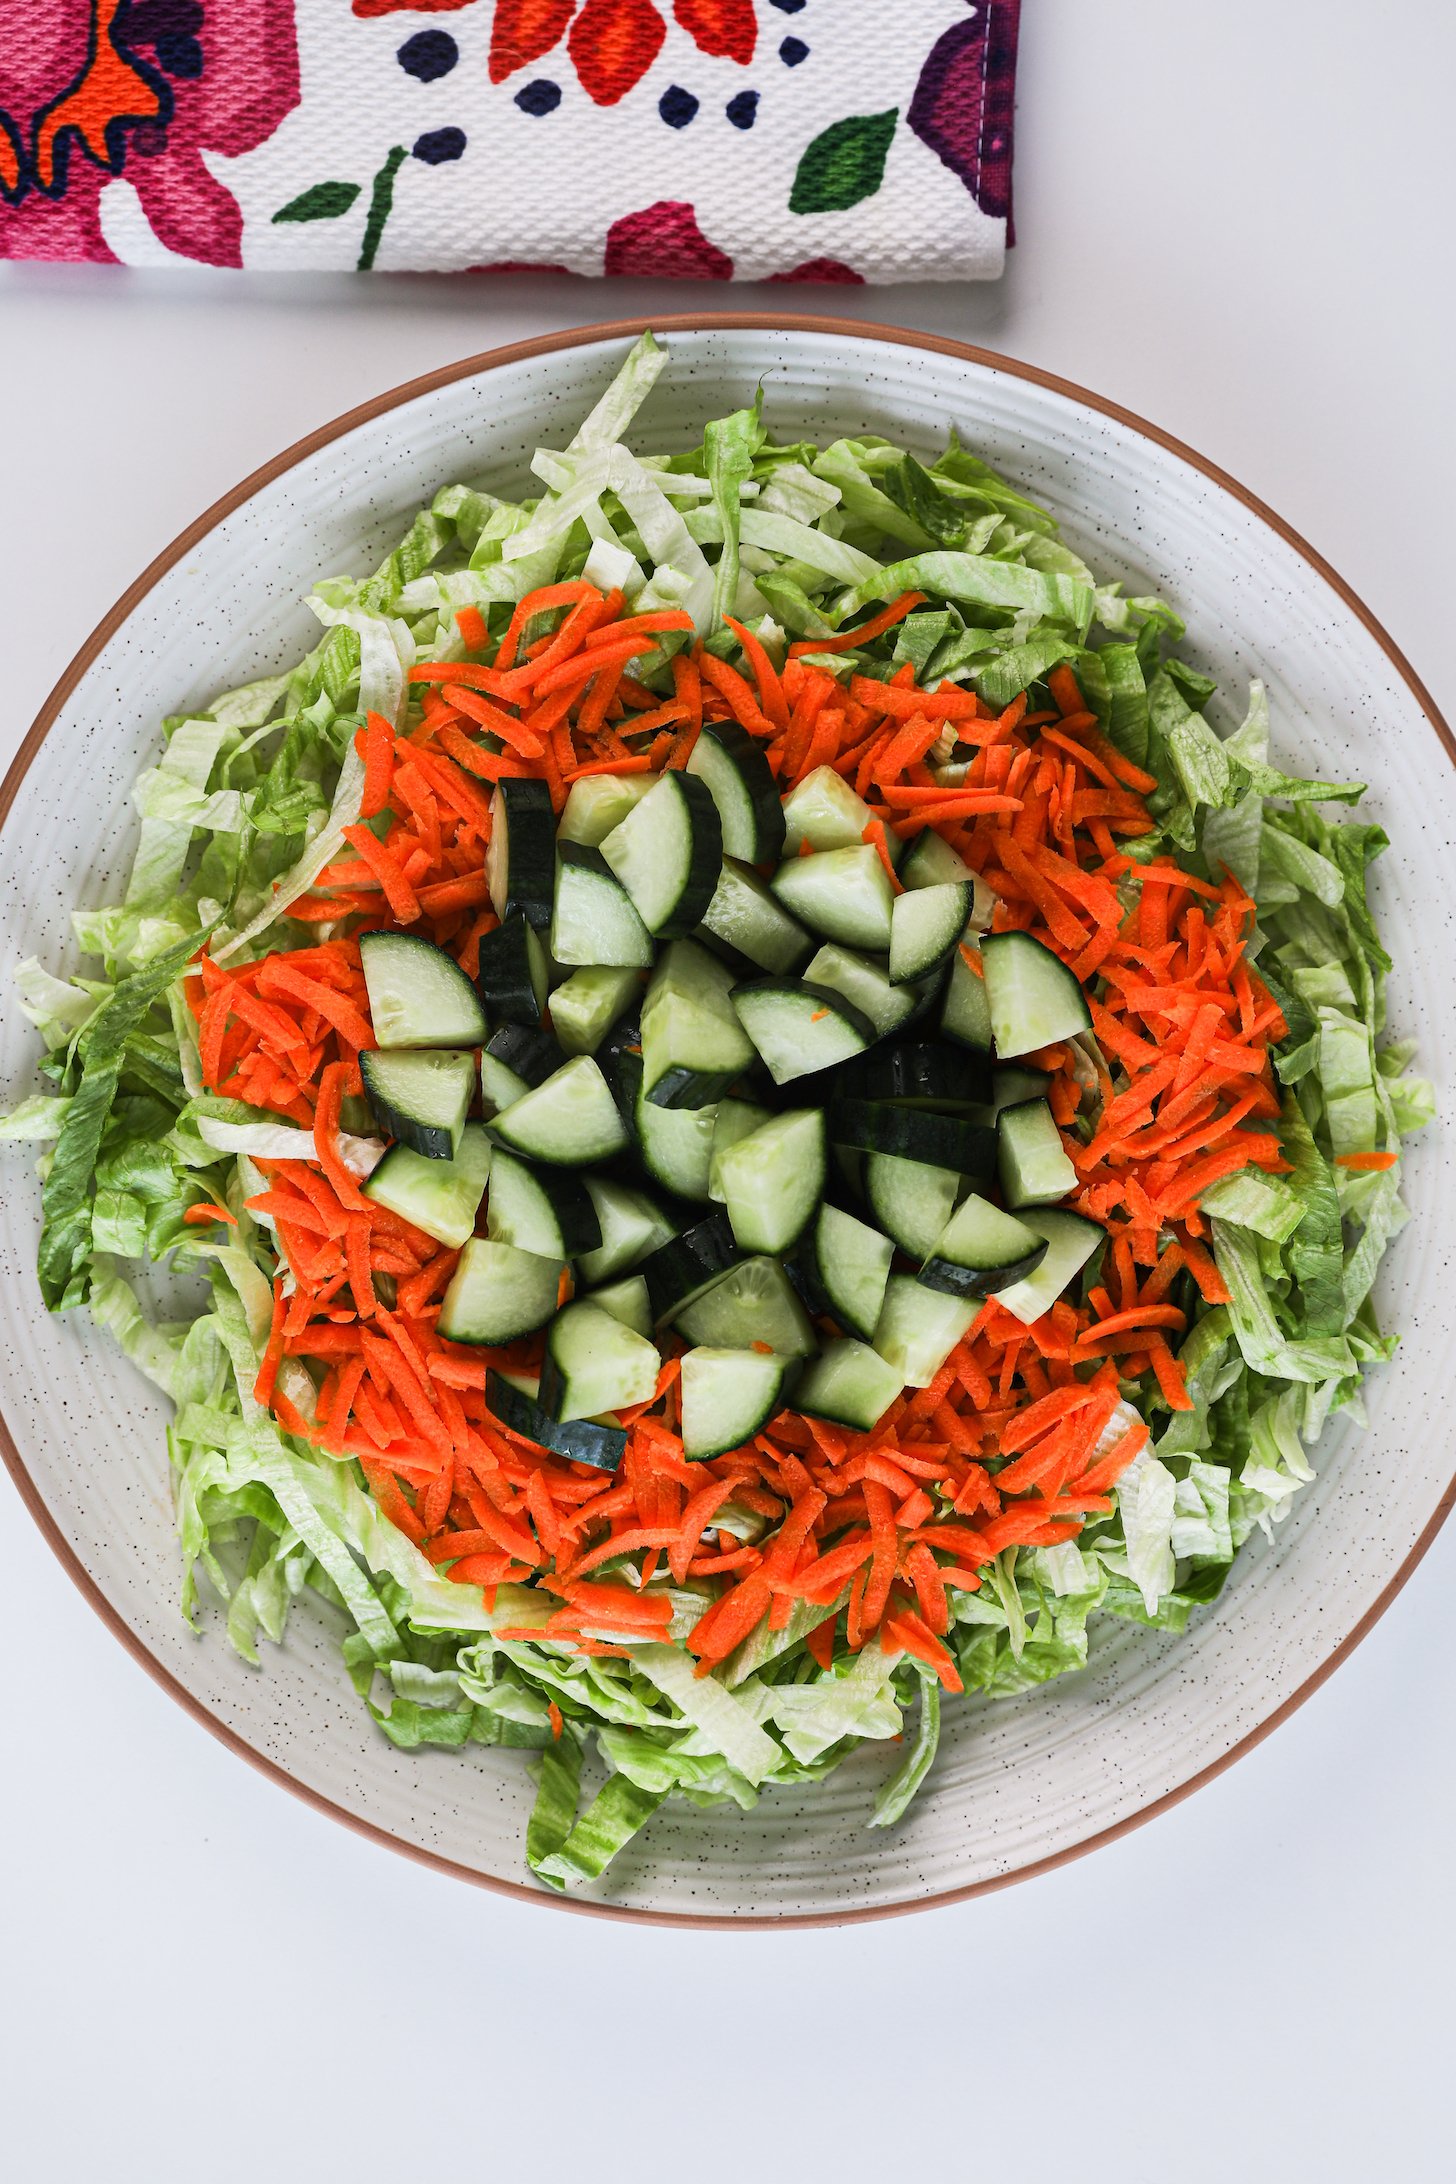 Top-view of a vibrant salad plate, layered with crisp iceberg lettuce, grated carrot, and topped with cucumber cubes.